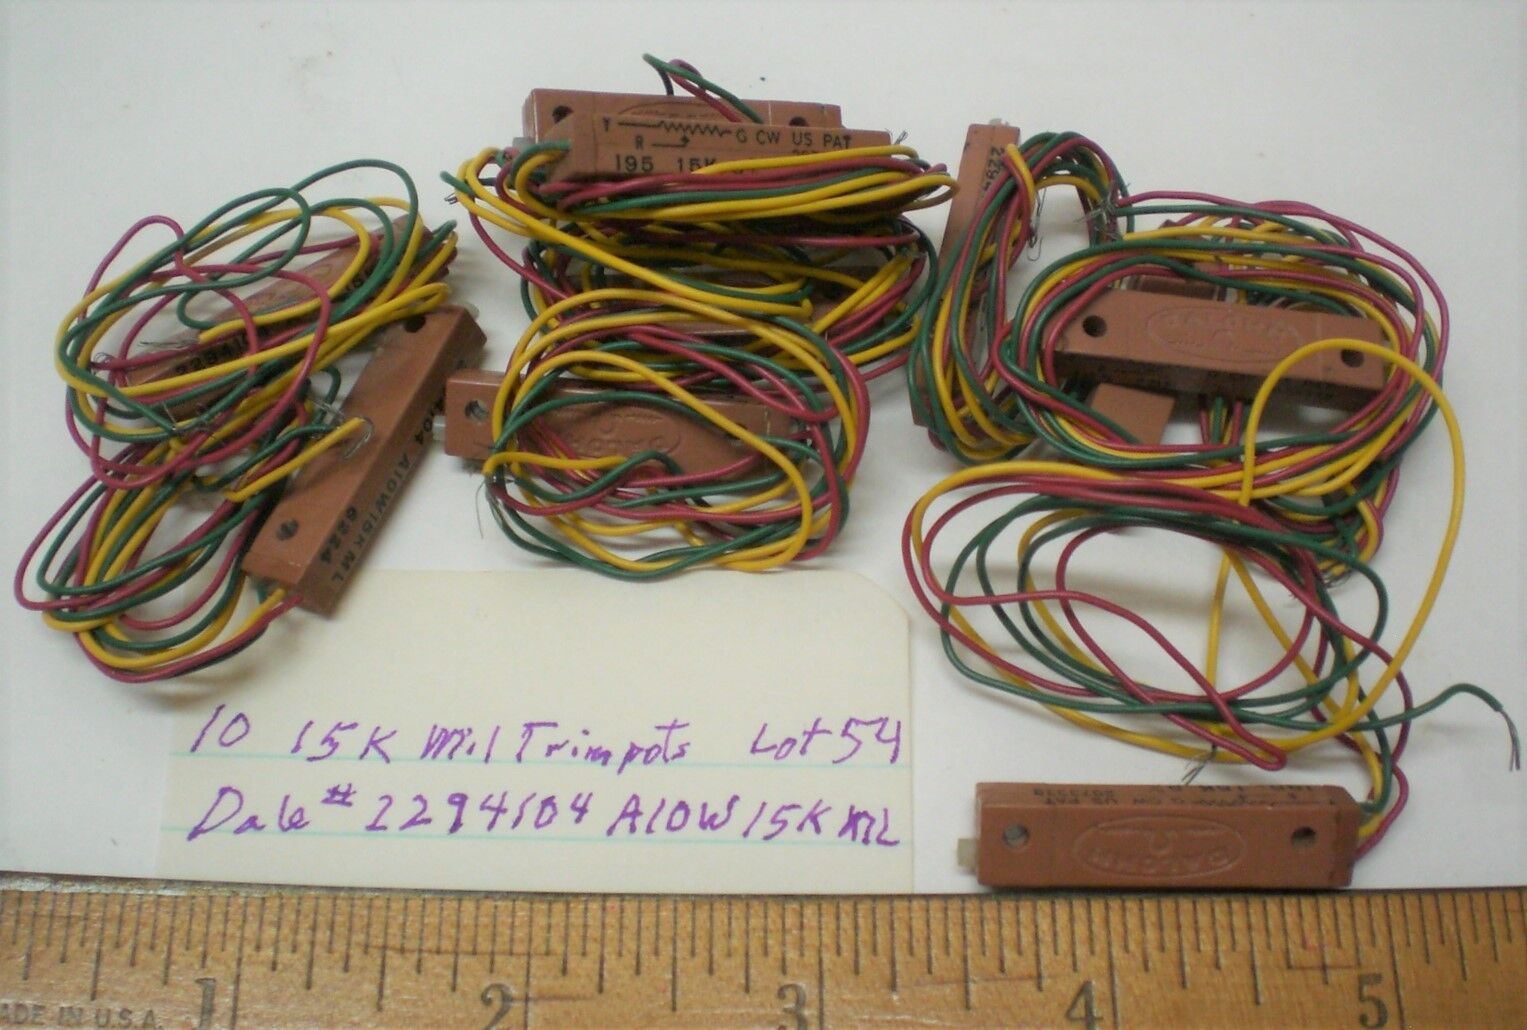 10 Trim Pots Wire Leads 15 K,Military DALE #2294101A10W15KML Lot 54, Made in USA